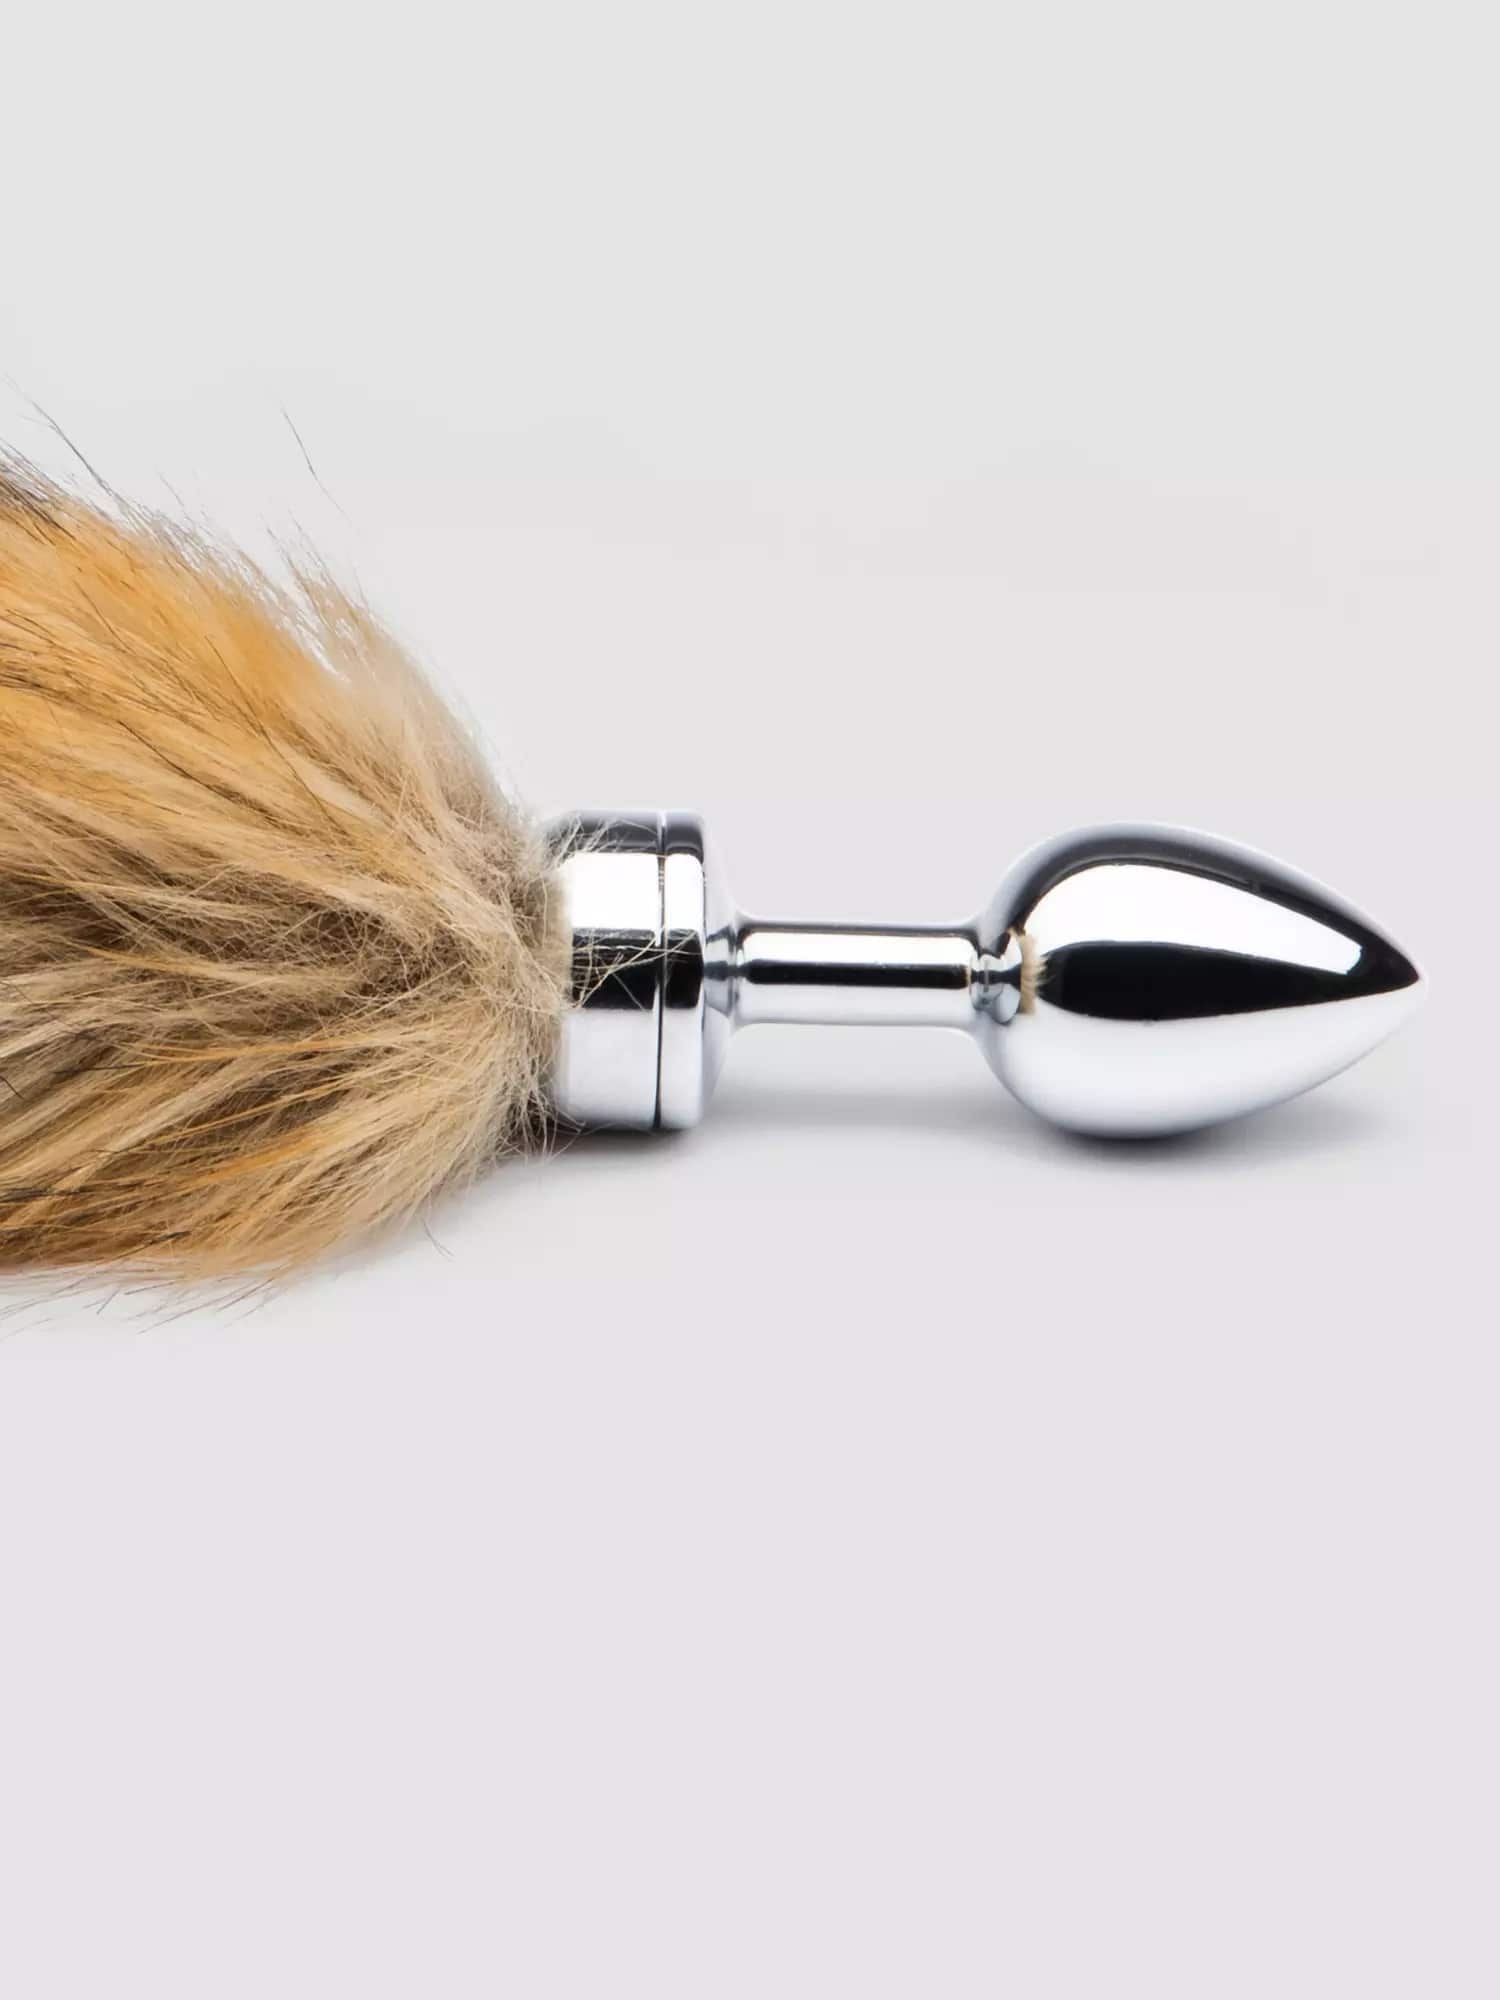 DOMINIX Deluxe Stainless Steel Faux Fox Tail Butt Plug. Slide 4